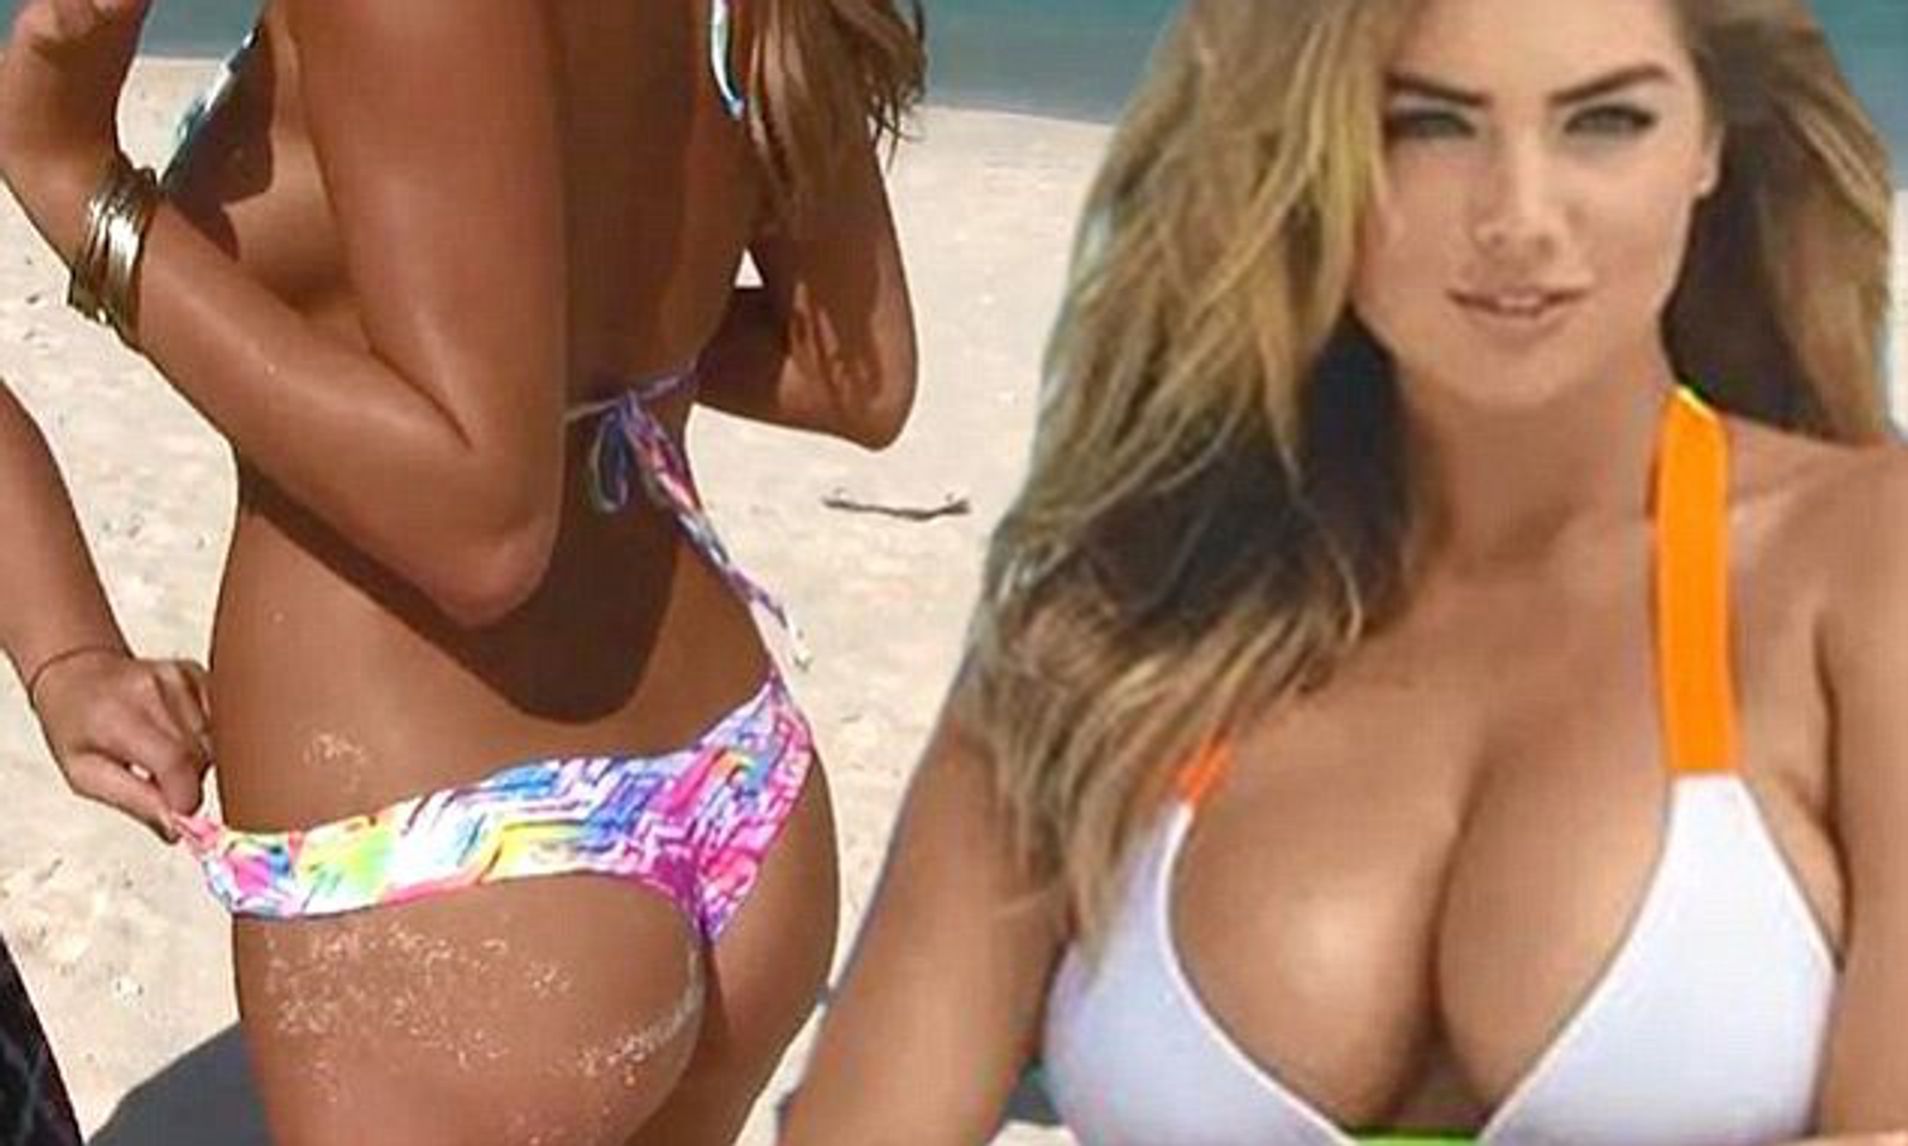 dan palay recommends kate upton butt pic